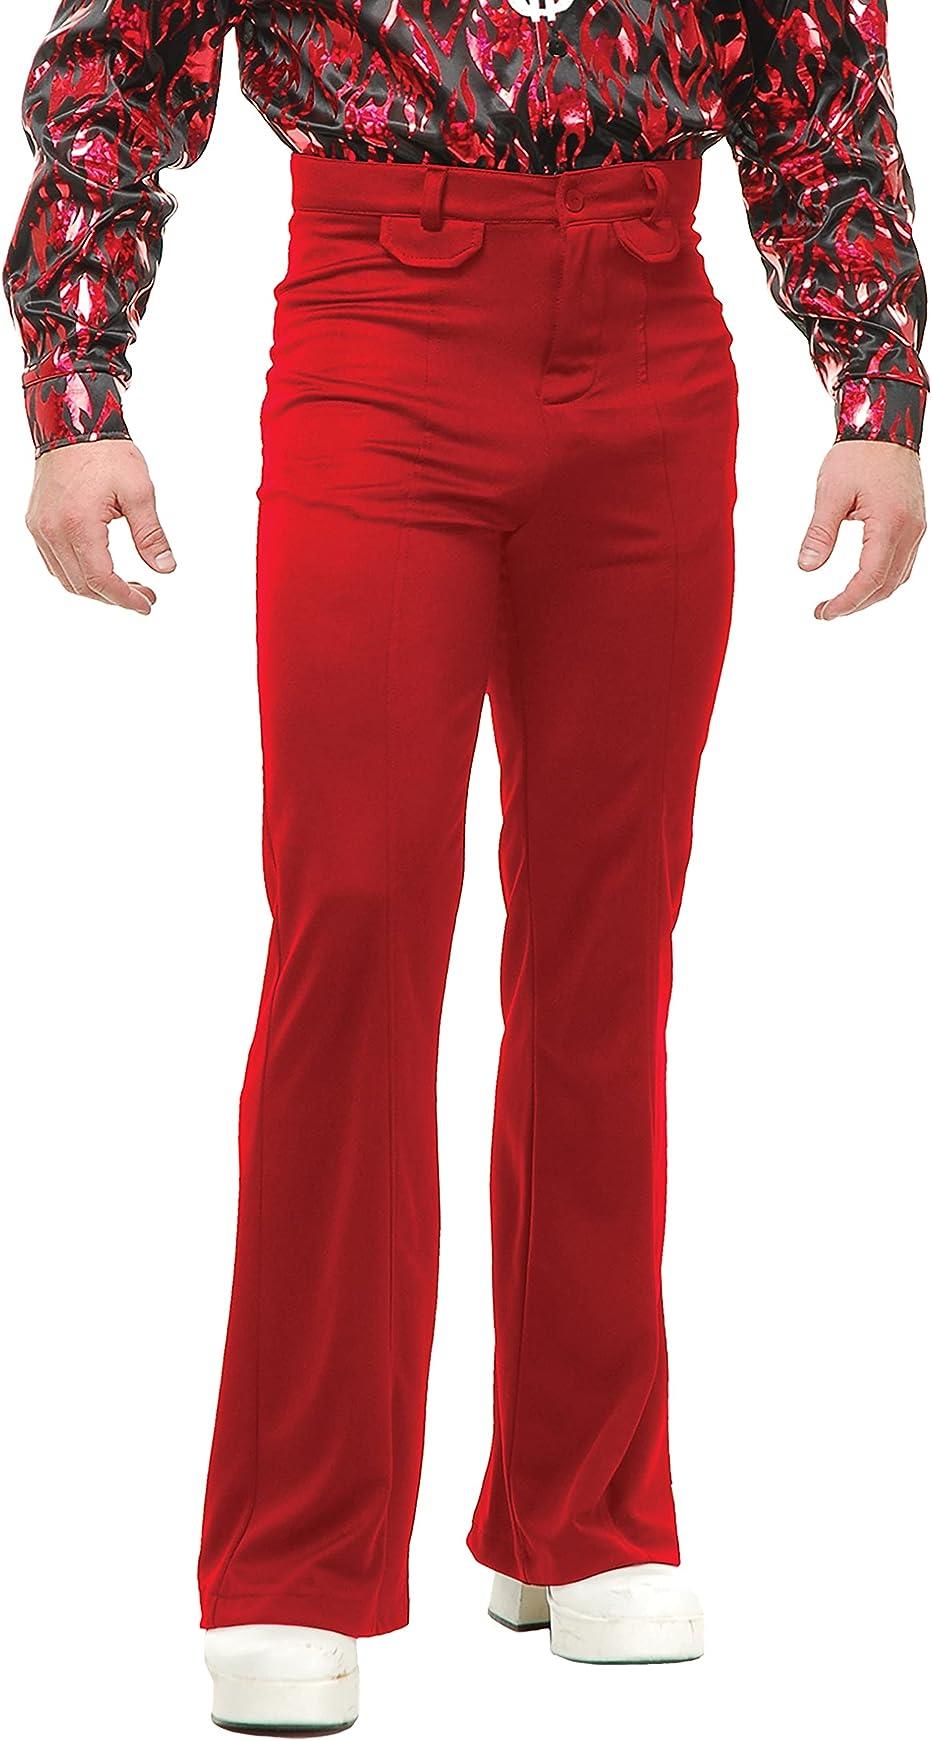 red pants | Red pants men, Red trousers, Red trousers outfit